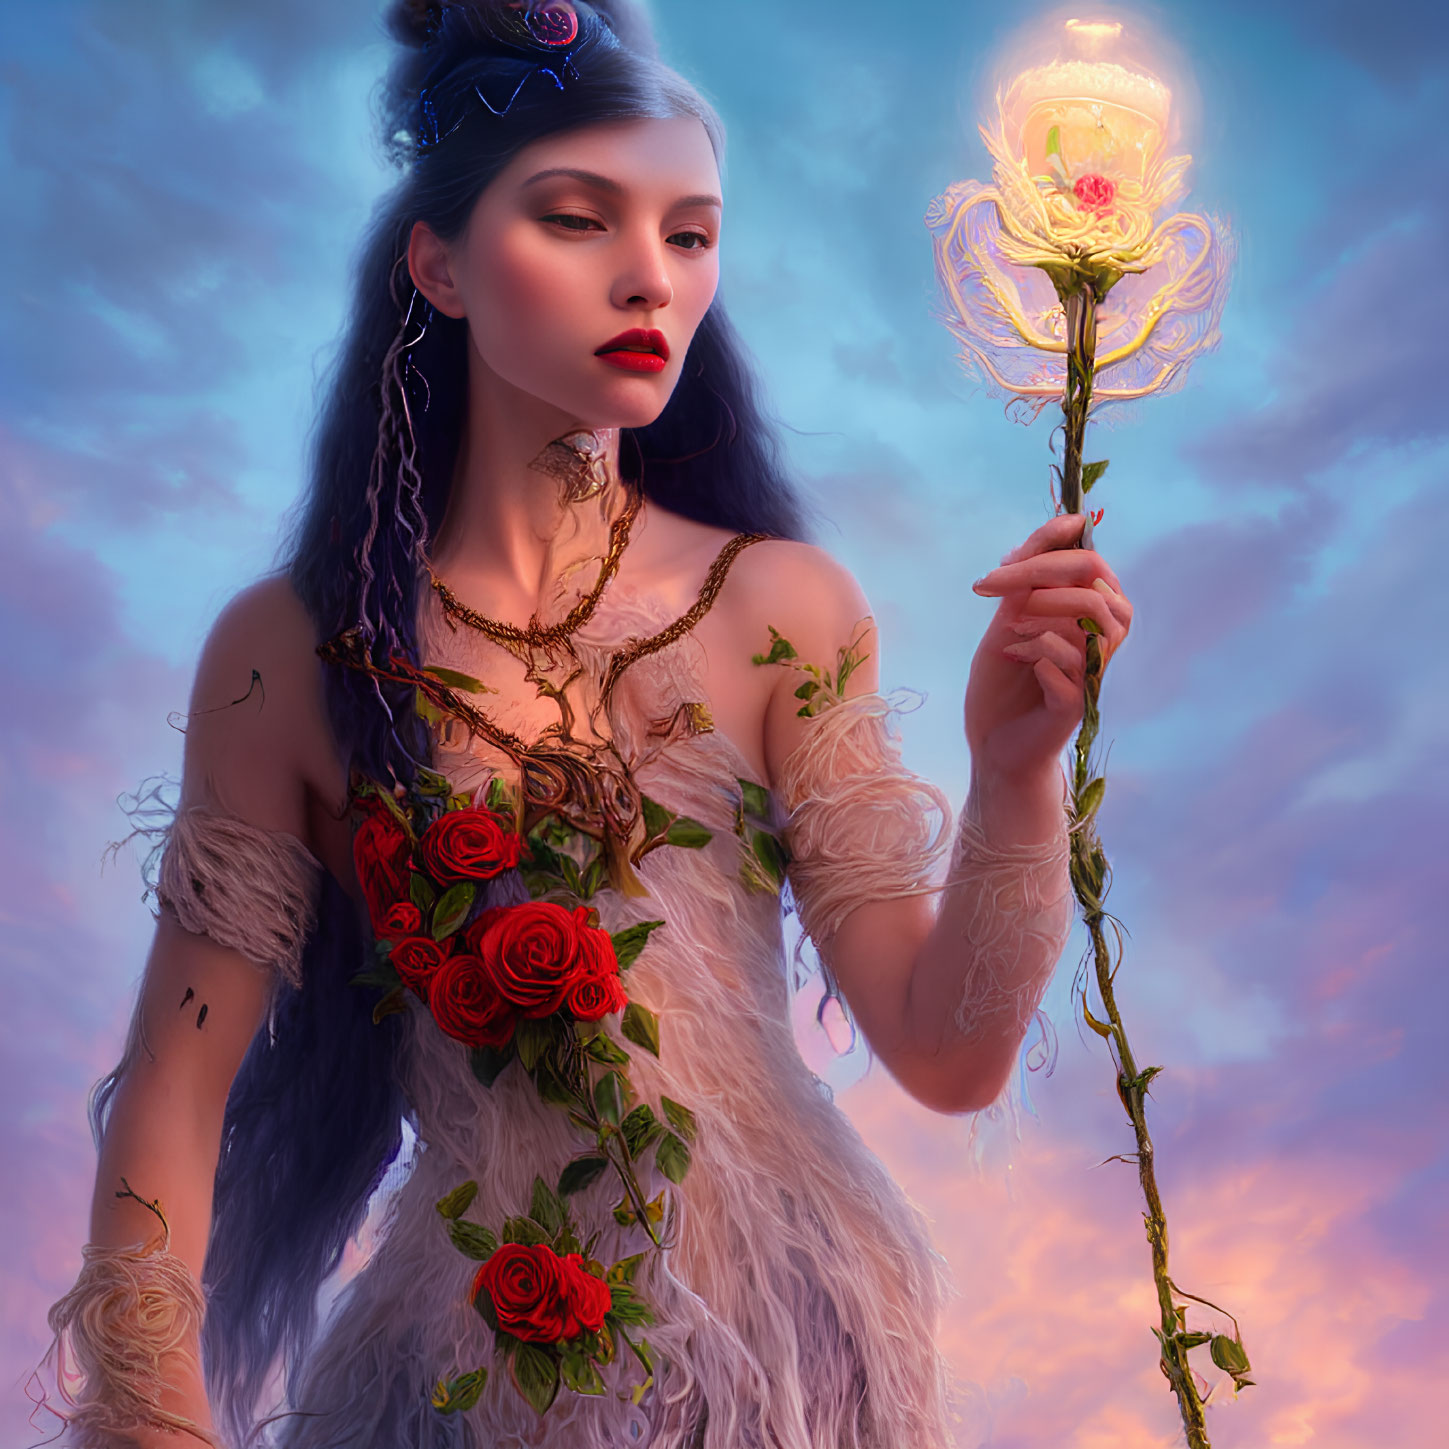 Fantasy-themed woman with illuminated flower staff in dusk sky.